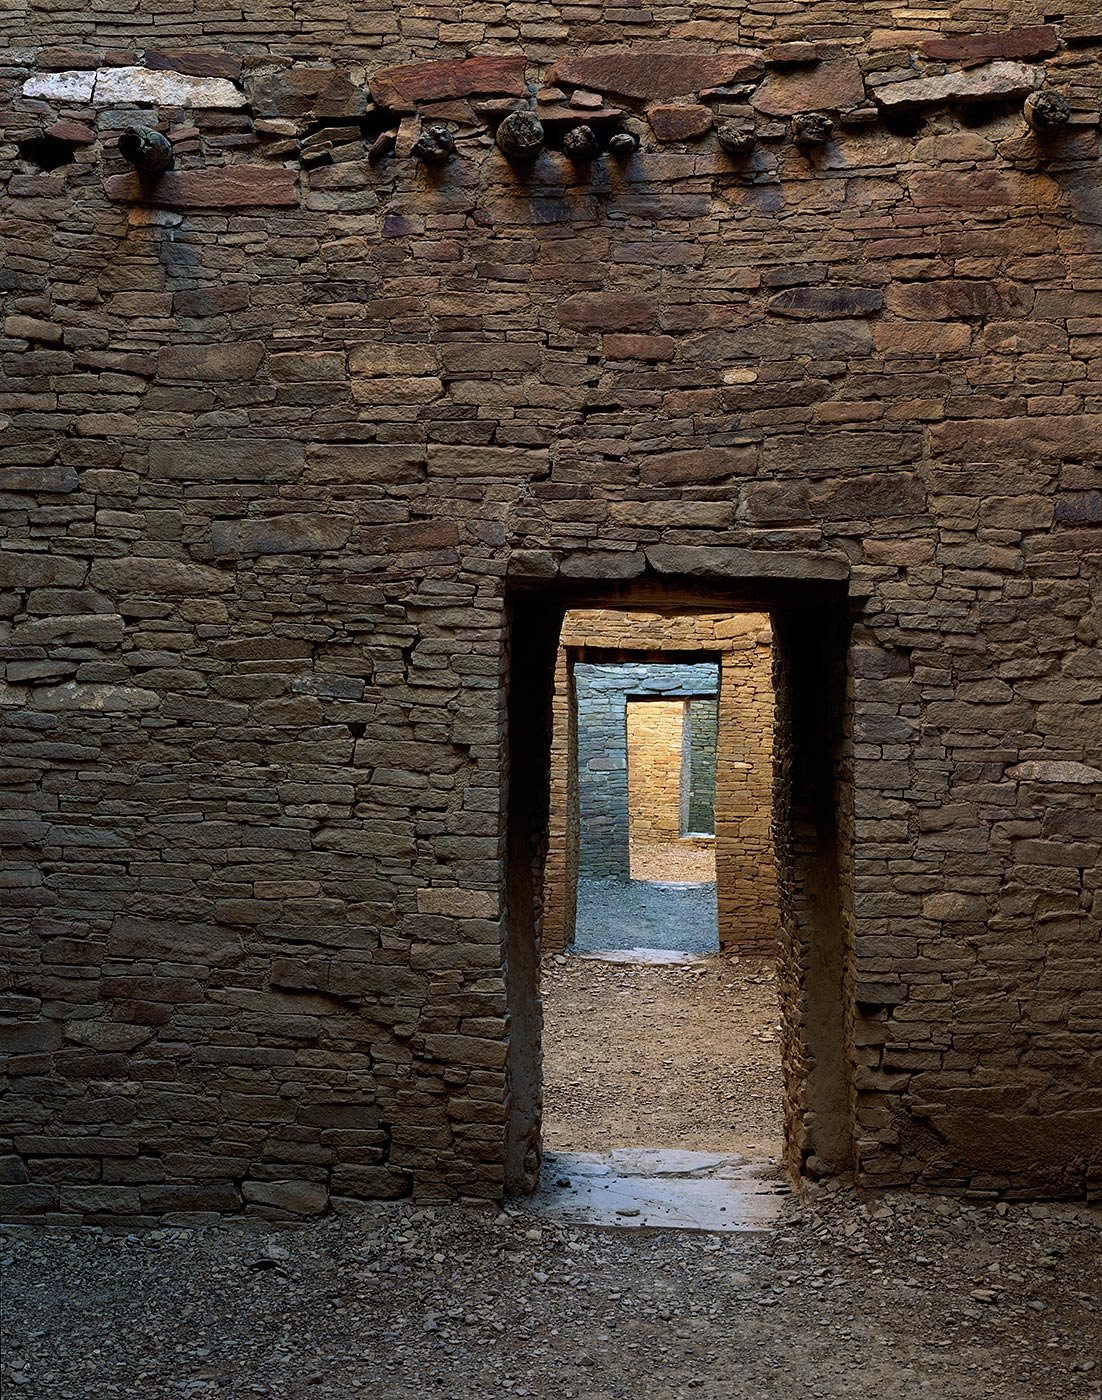 Image of Doorways Through the Ages, Chaco Canyon National Park, New Mexico